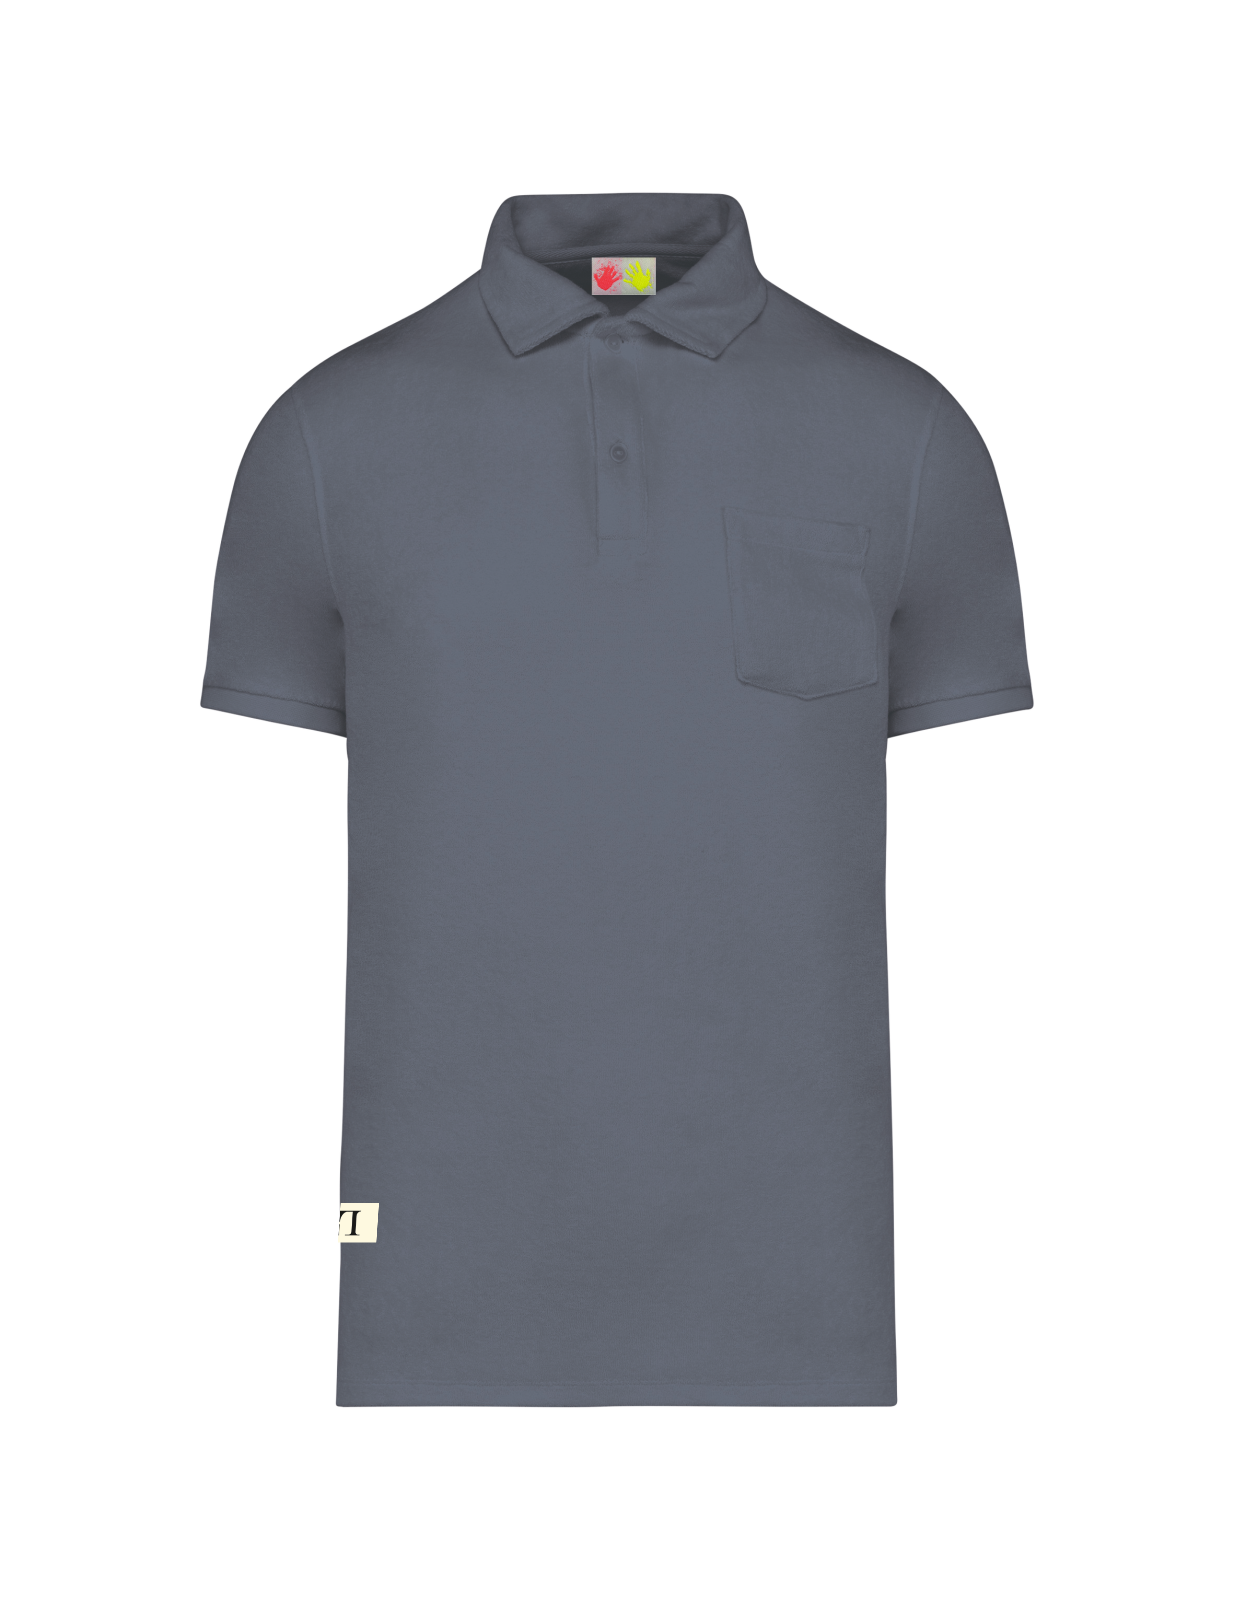 LL -Terry Towel Polo Shirt mineral grey